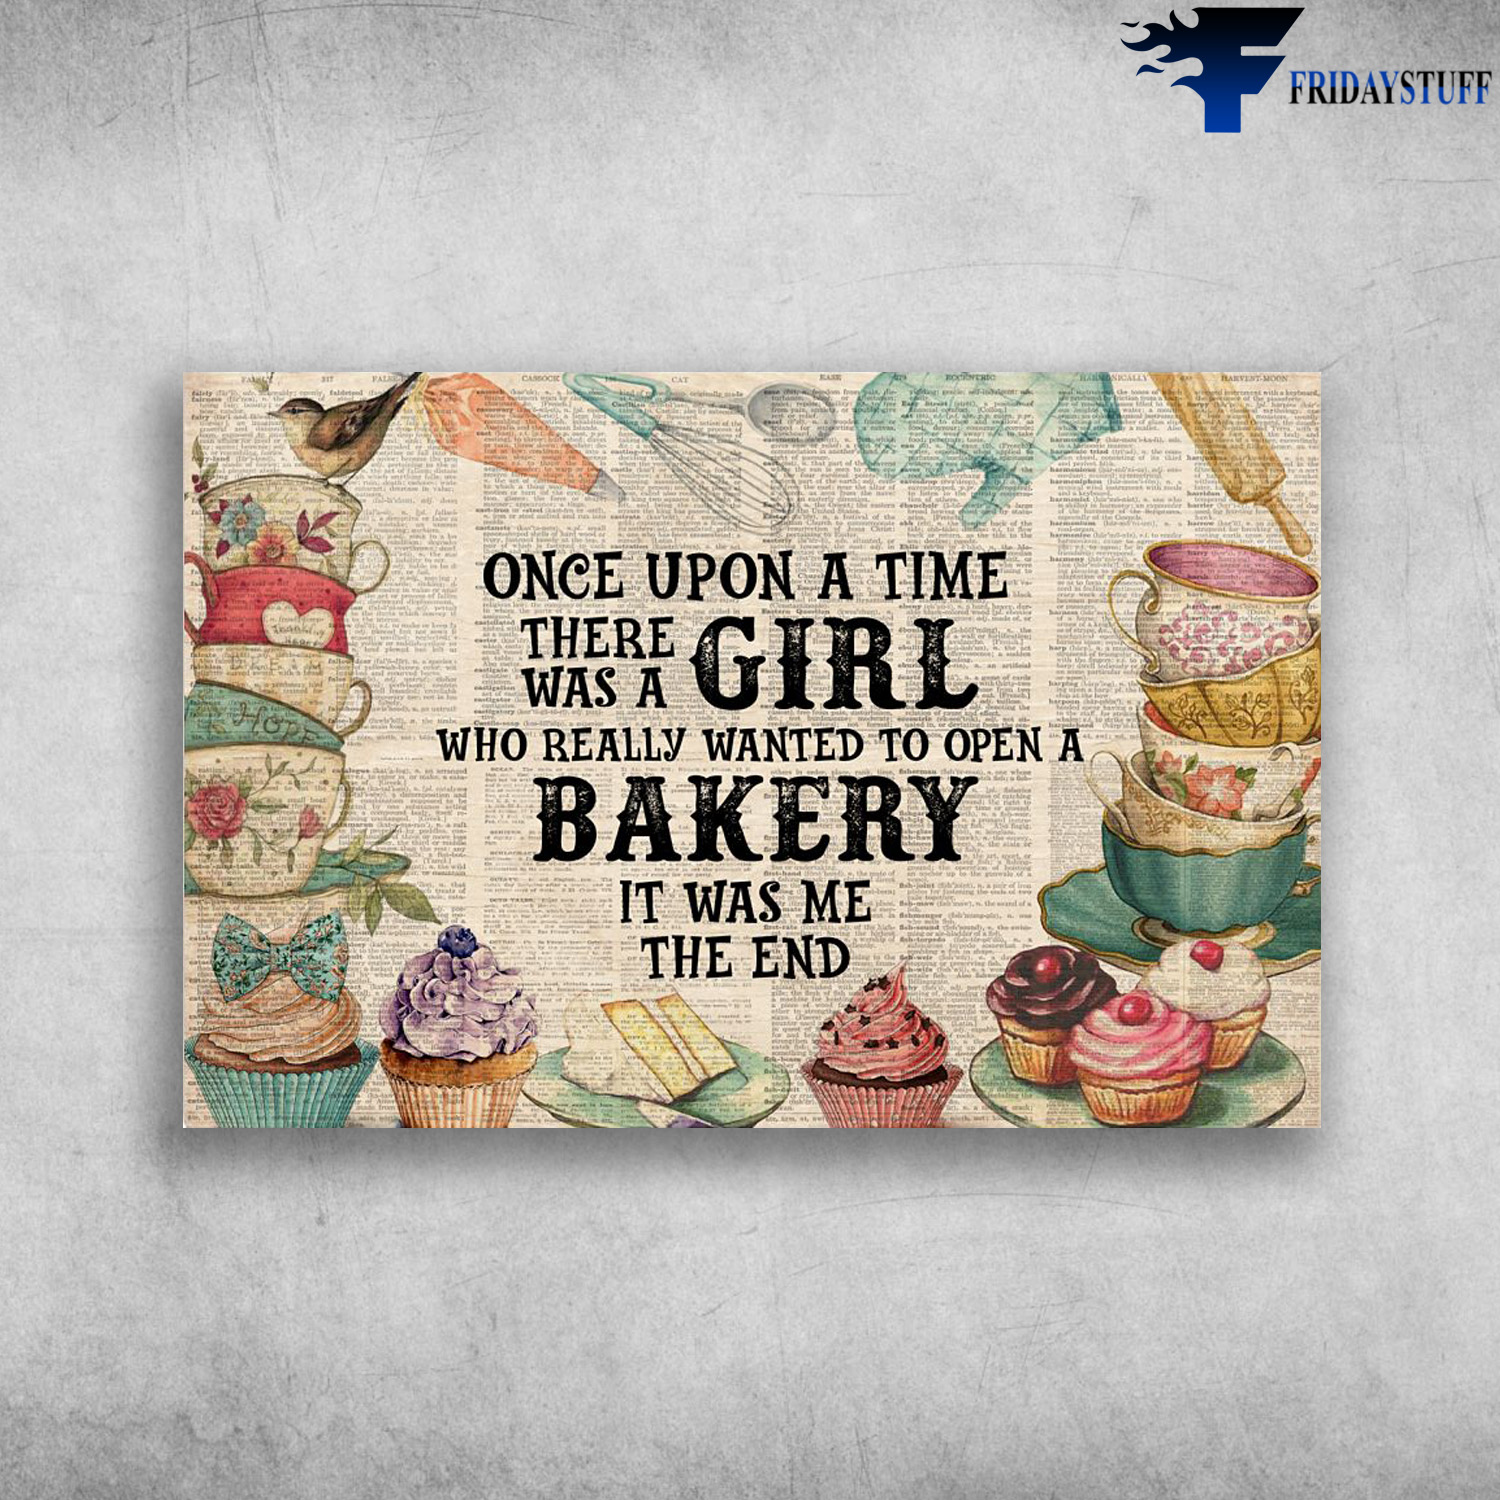 Cake Bakery - Once Upon A Time, There Was A Girl, Who Really Wanted To Open A Bakery, It Was Me, The End